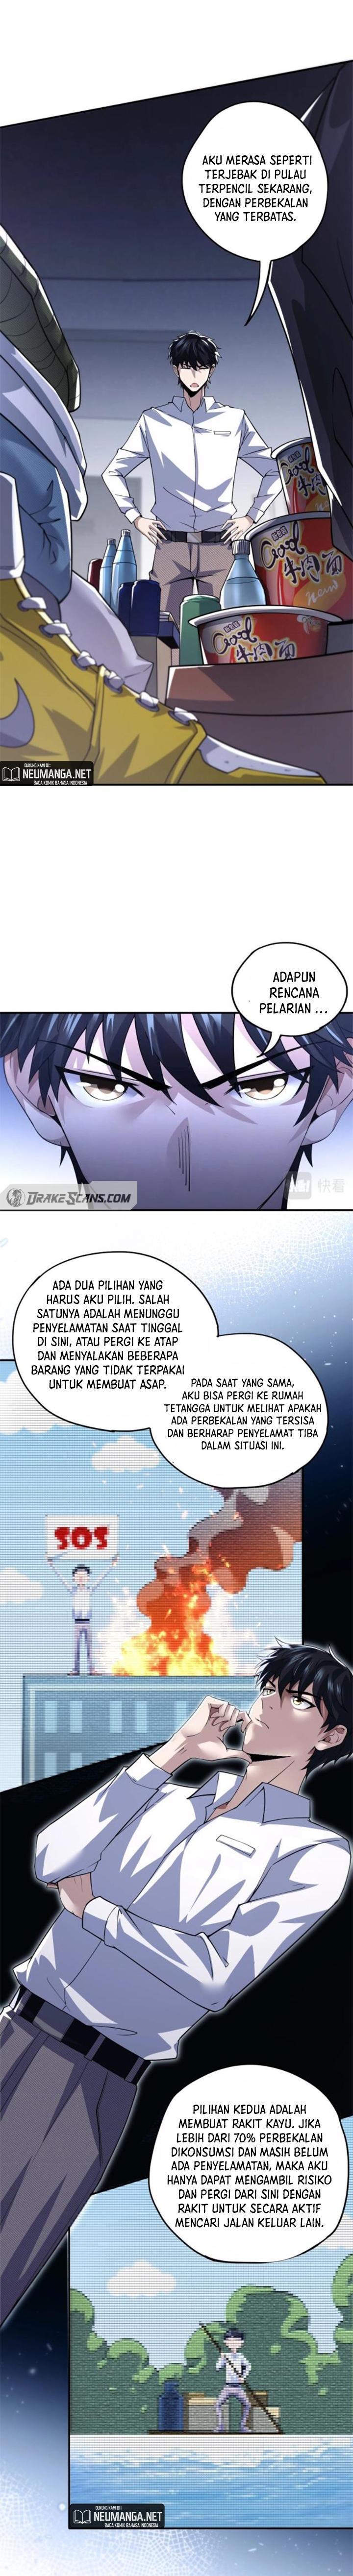 evolution-in-the-flood Chapter chapter-01